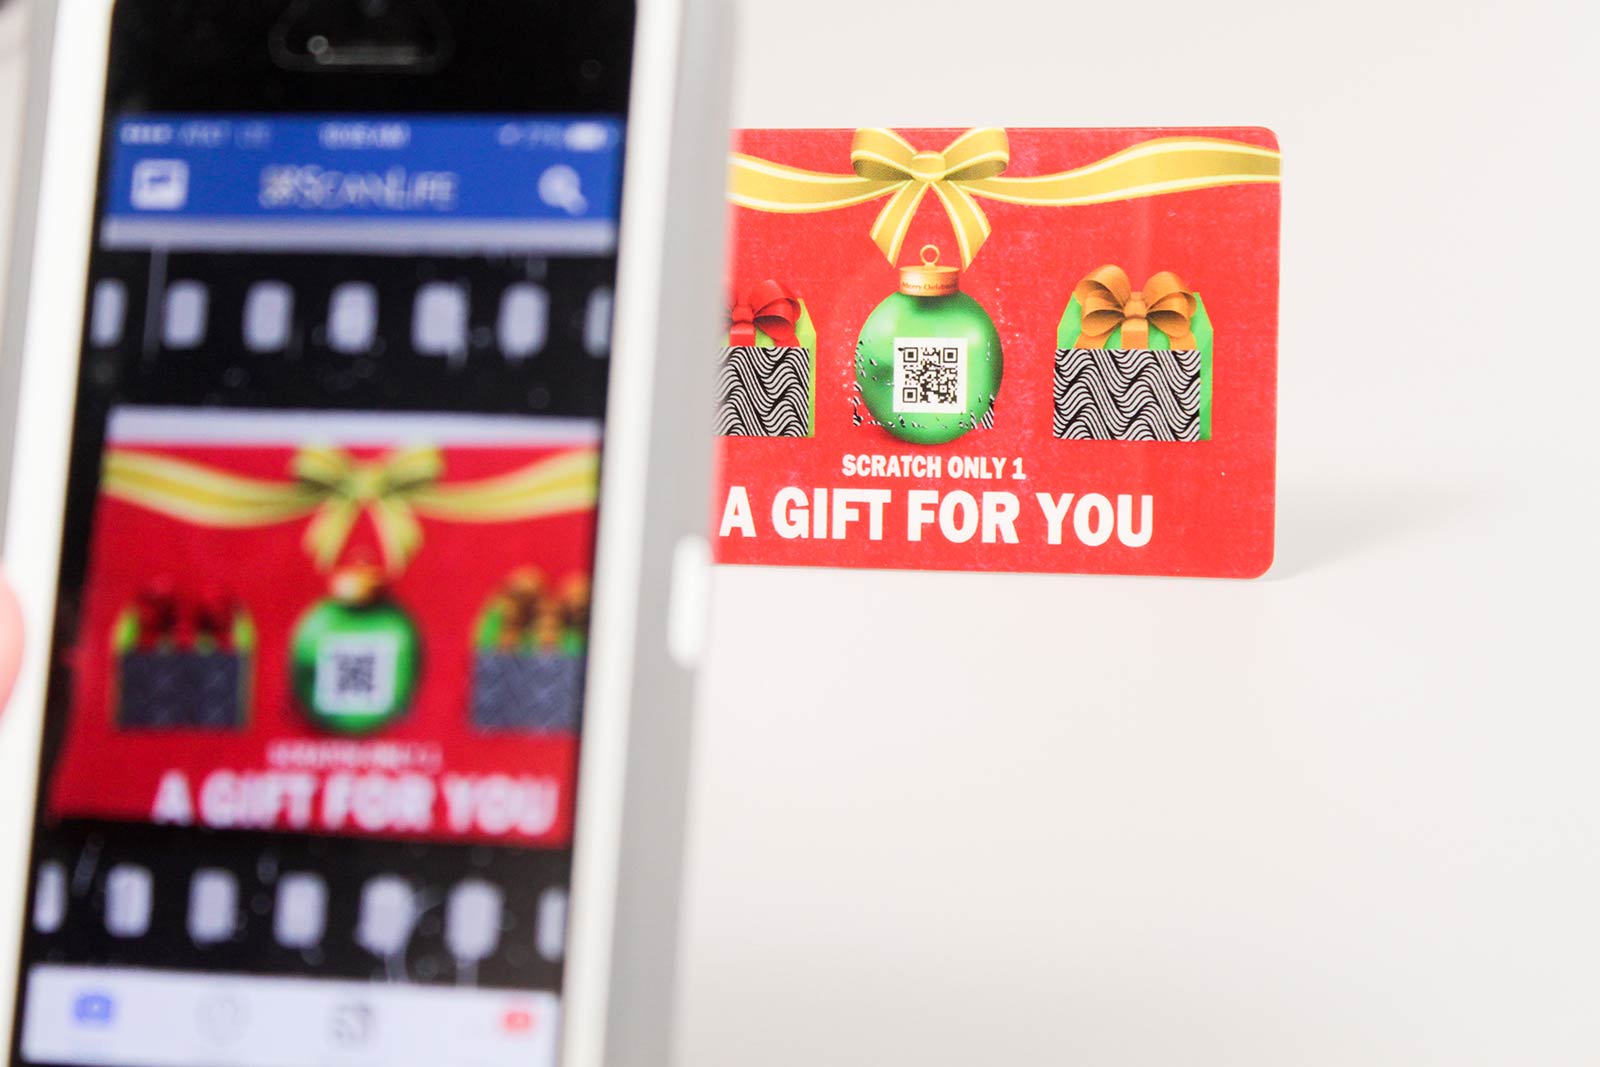 a-gift-for-you-scratch-off-promo-cards